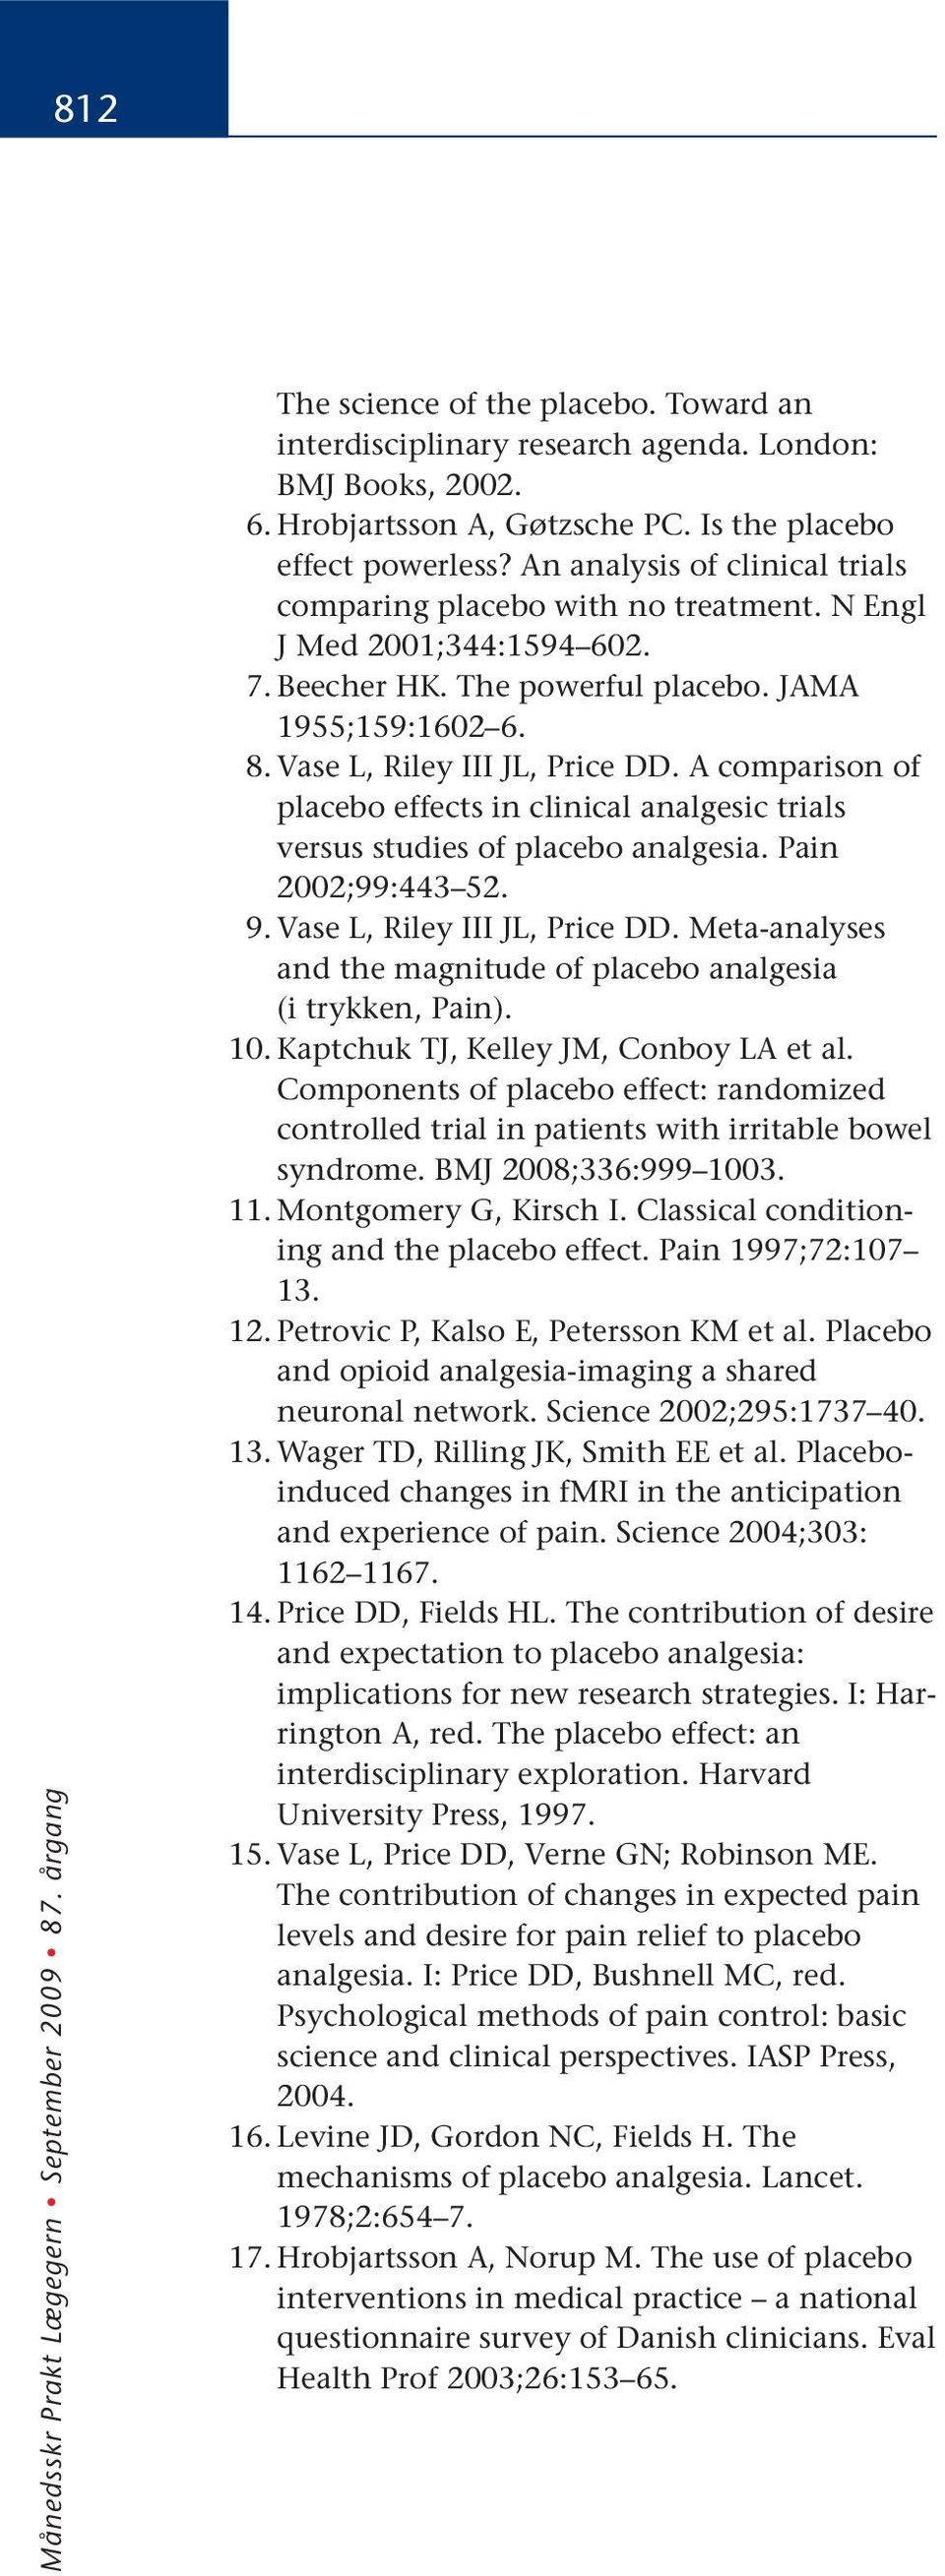 A comparison of placebo effects in clinical analgesic trials versus studies of placebo analgesia. Pain 2002;99:443 52. 9. Vase L, Riley III JL, Price DD.